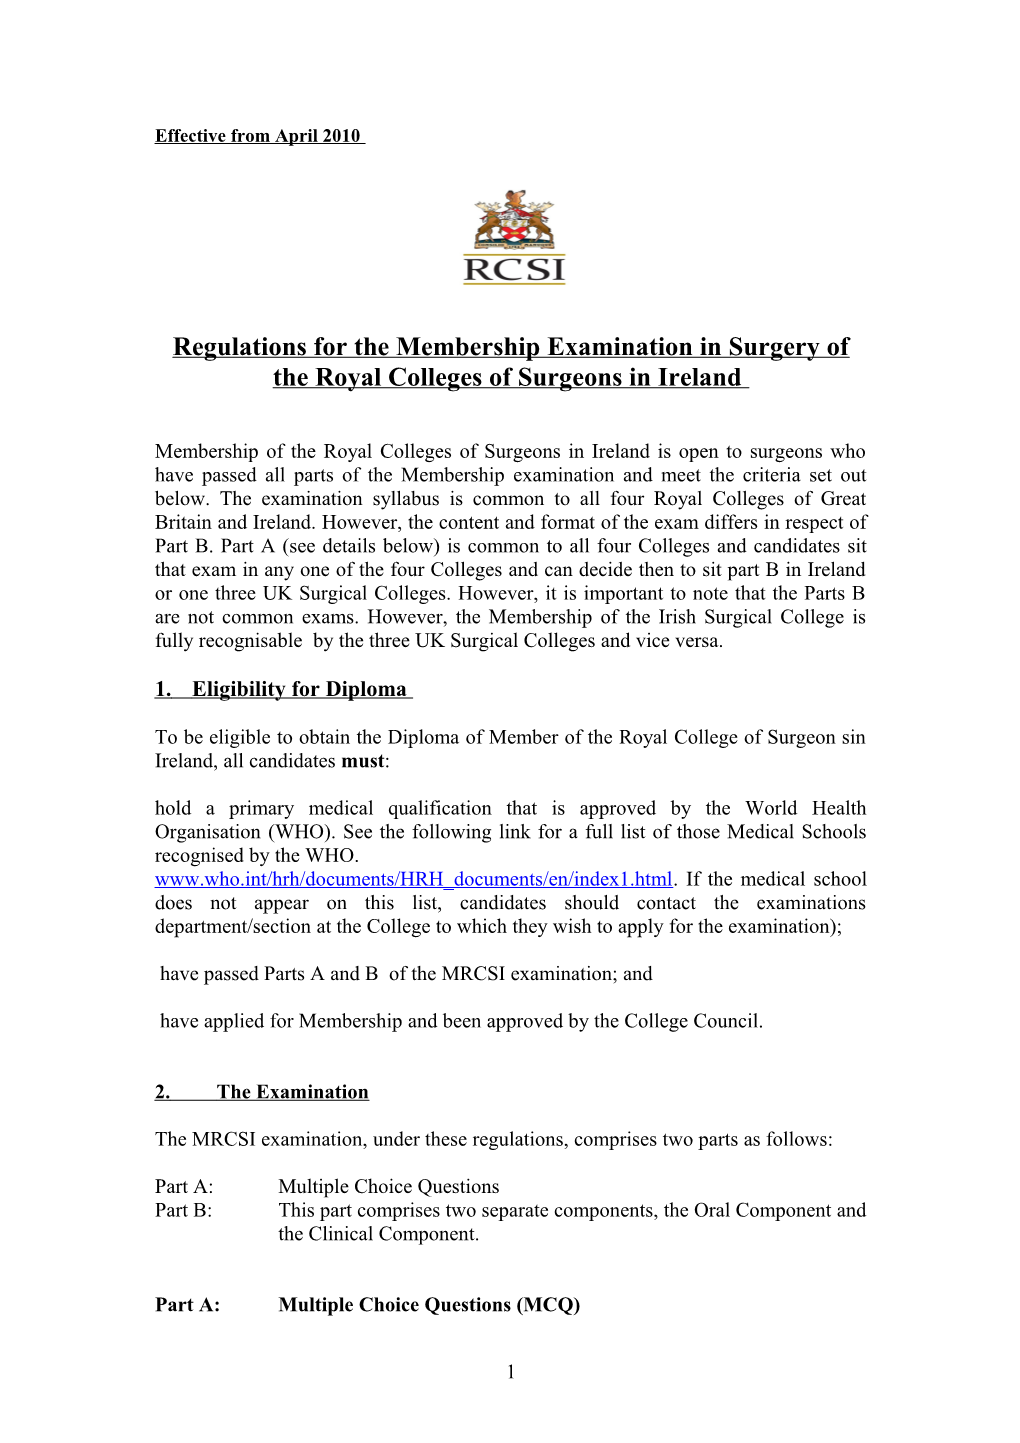 Regulations for the Membership Examination in Surgery of the Royal Colleges of Surgeons